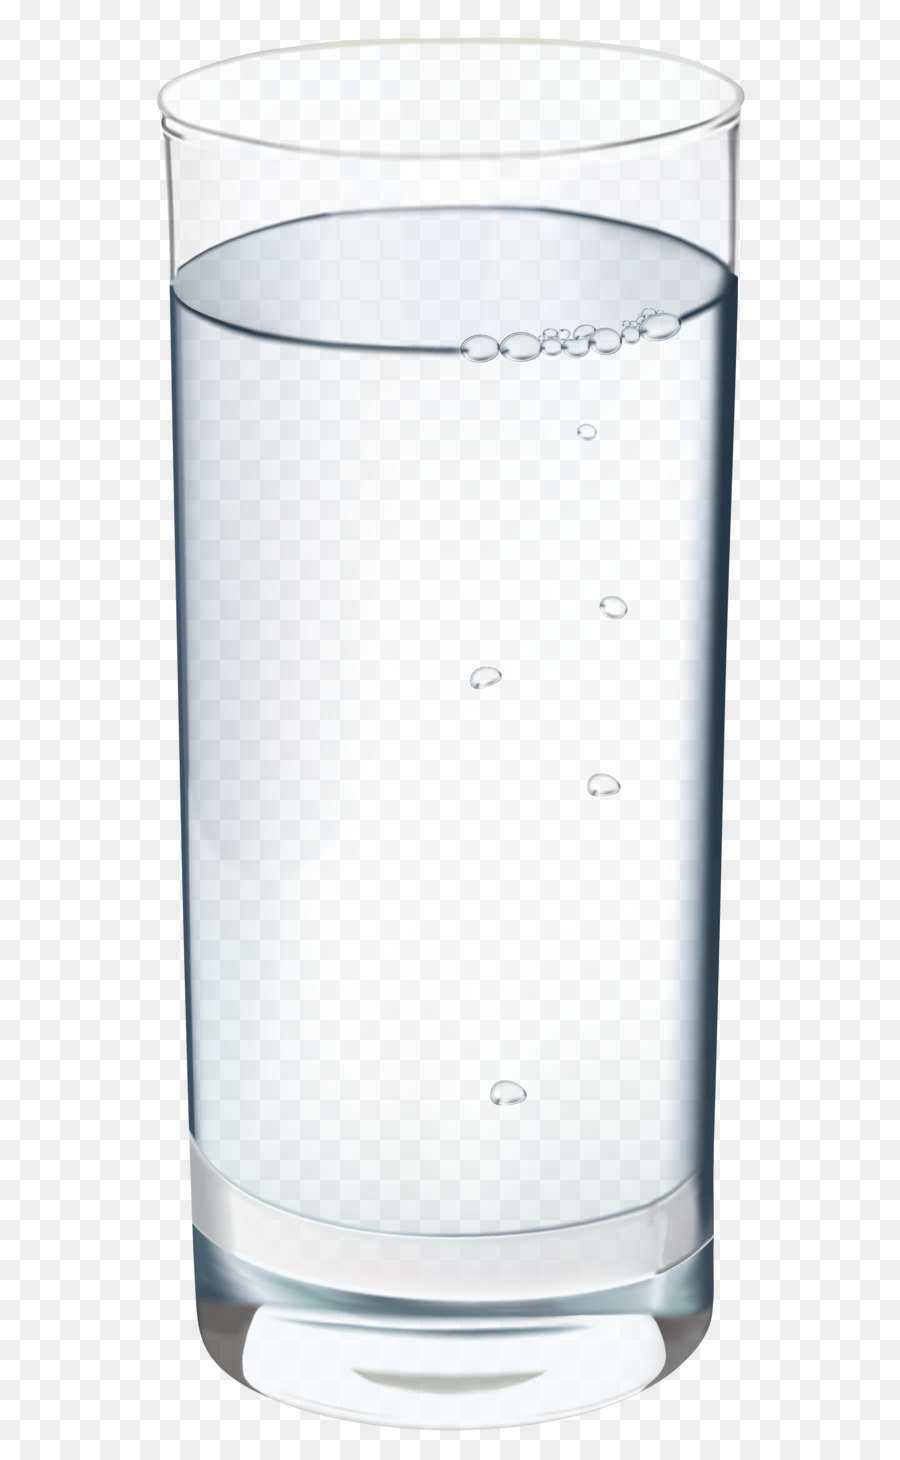 Glass Of Water PNG HD - 150080